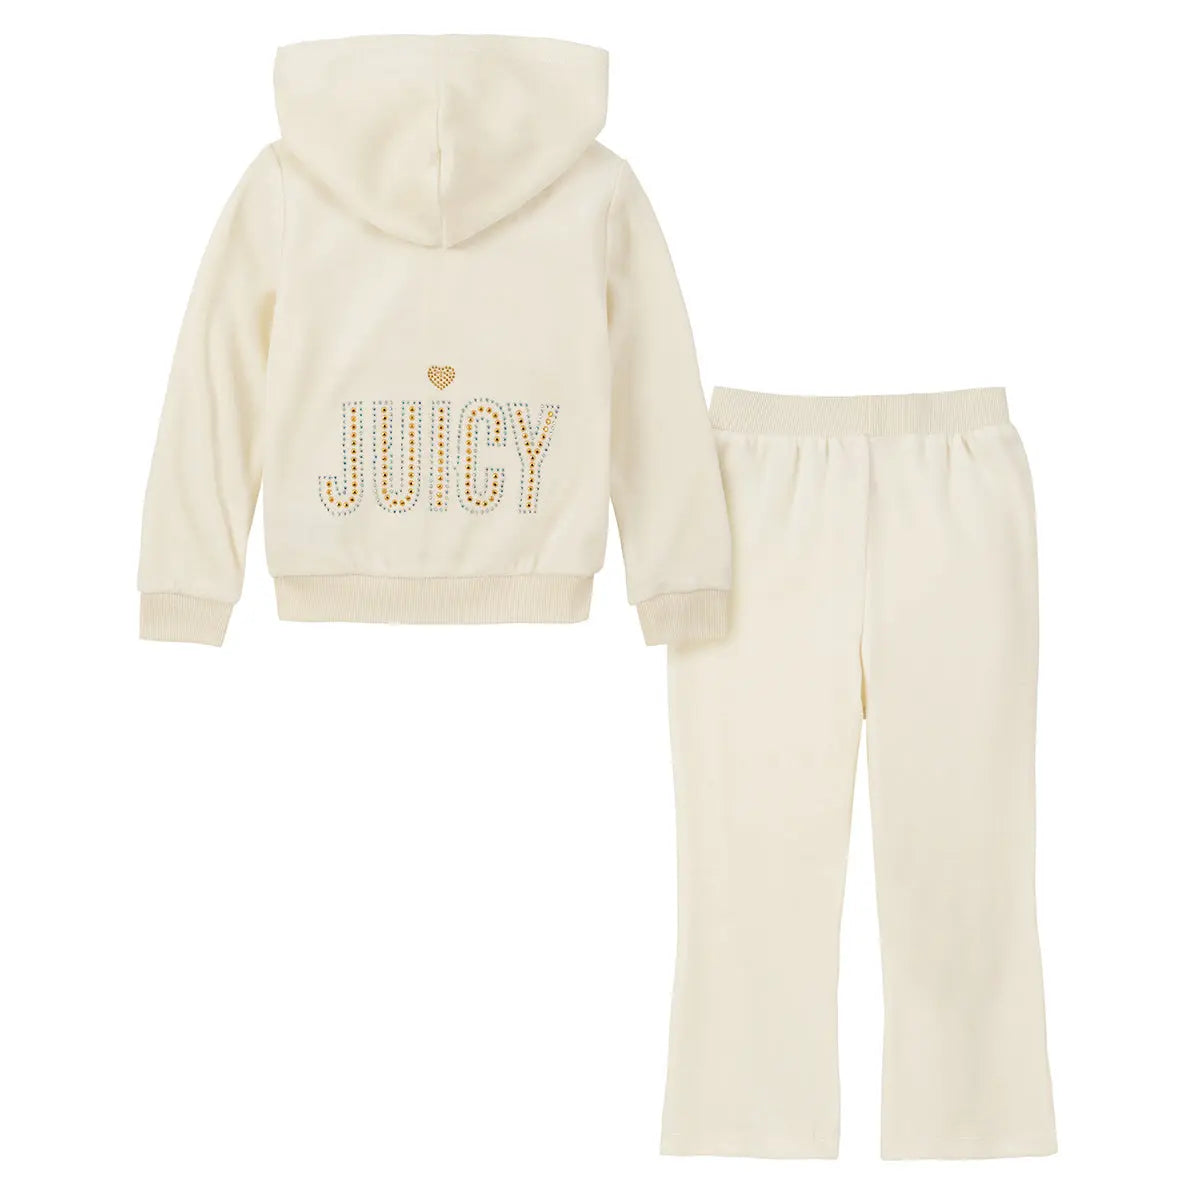  Juicy Couture baby girls 2 Pieces Hooded Jog and